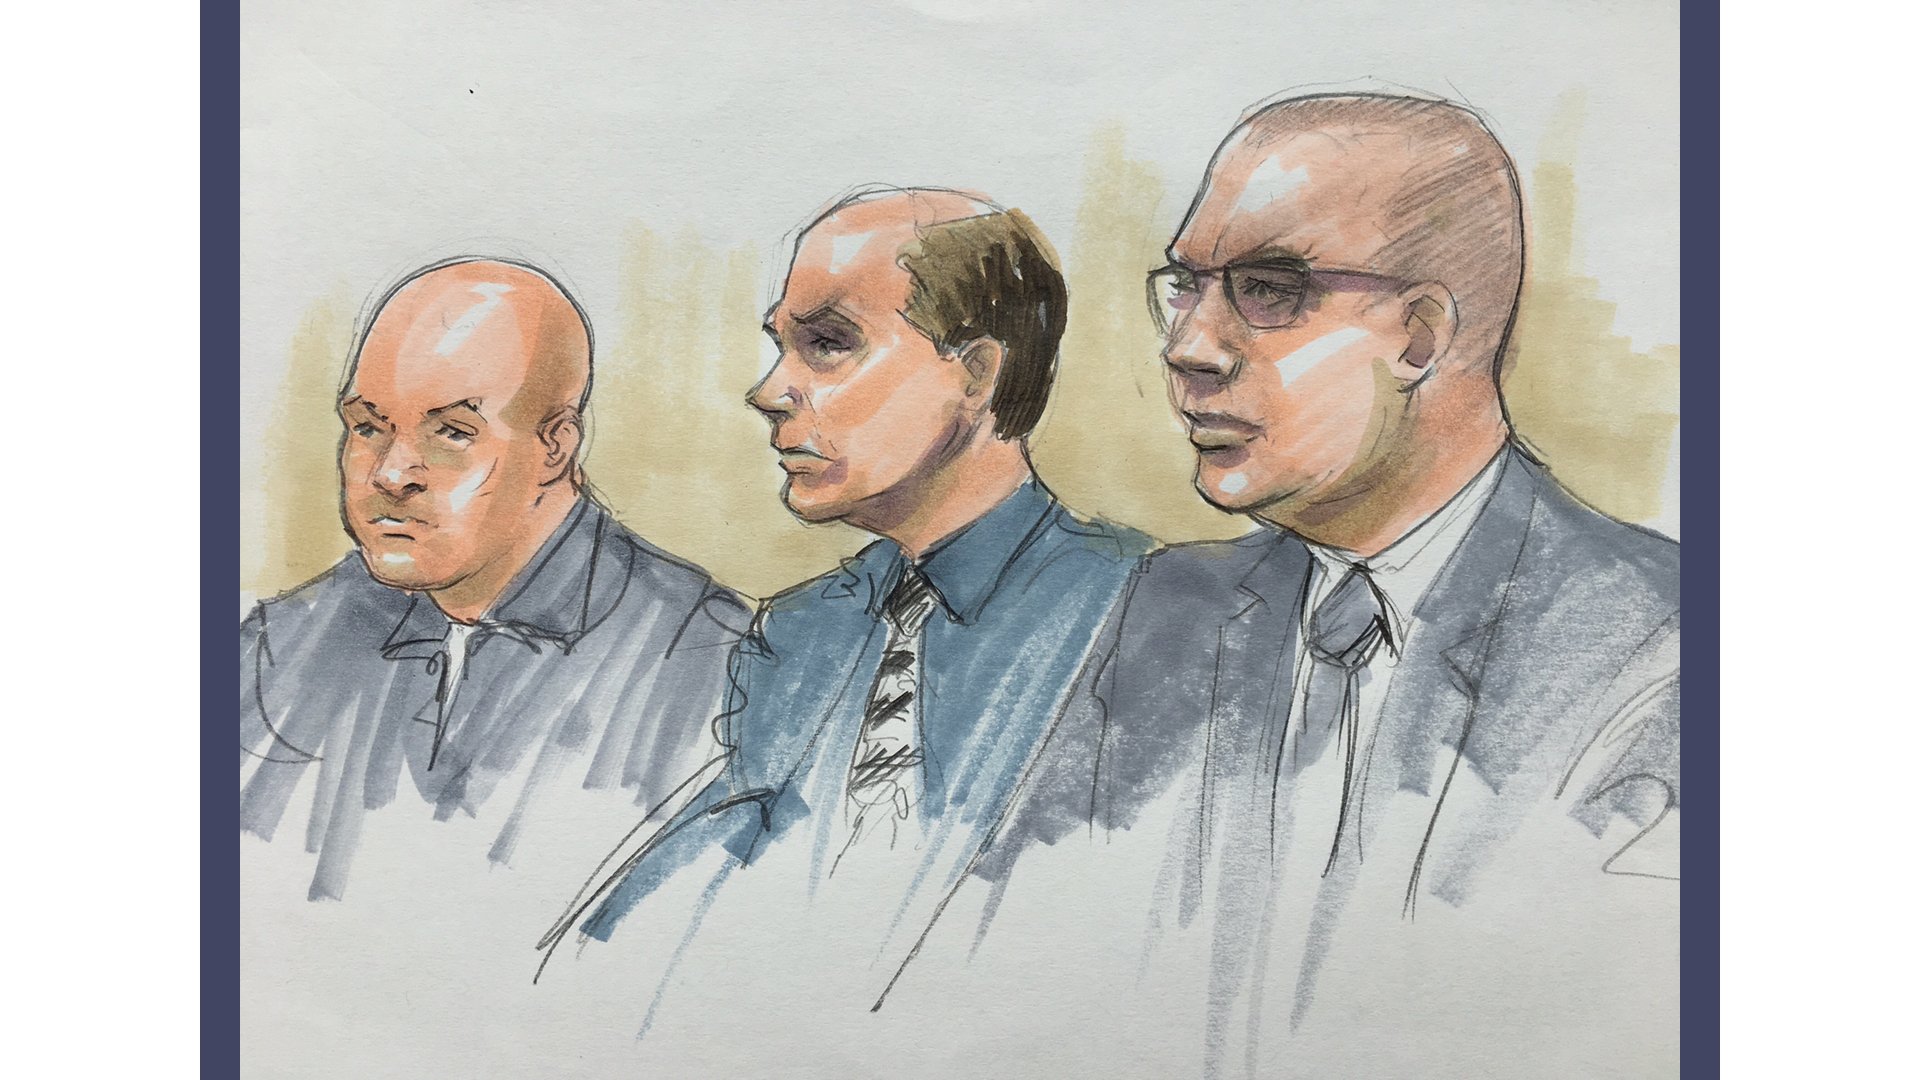 (Courtroom sketch by Thomas Gianni)